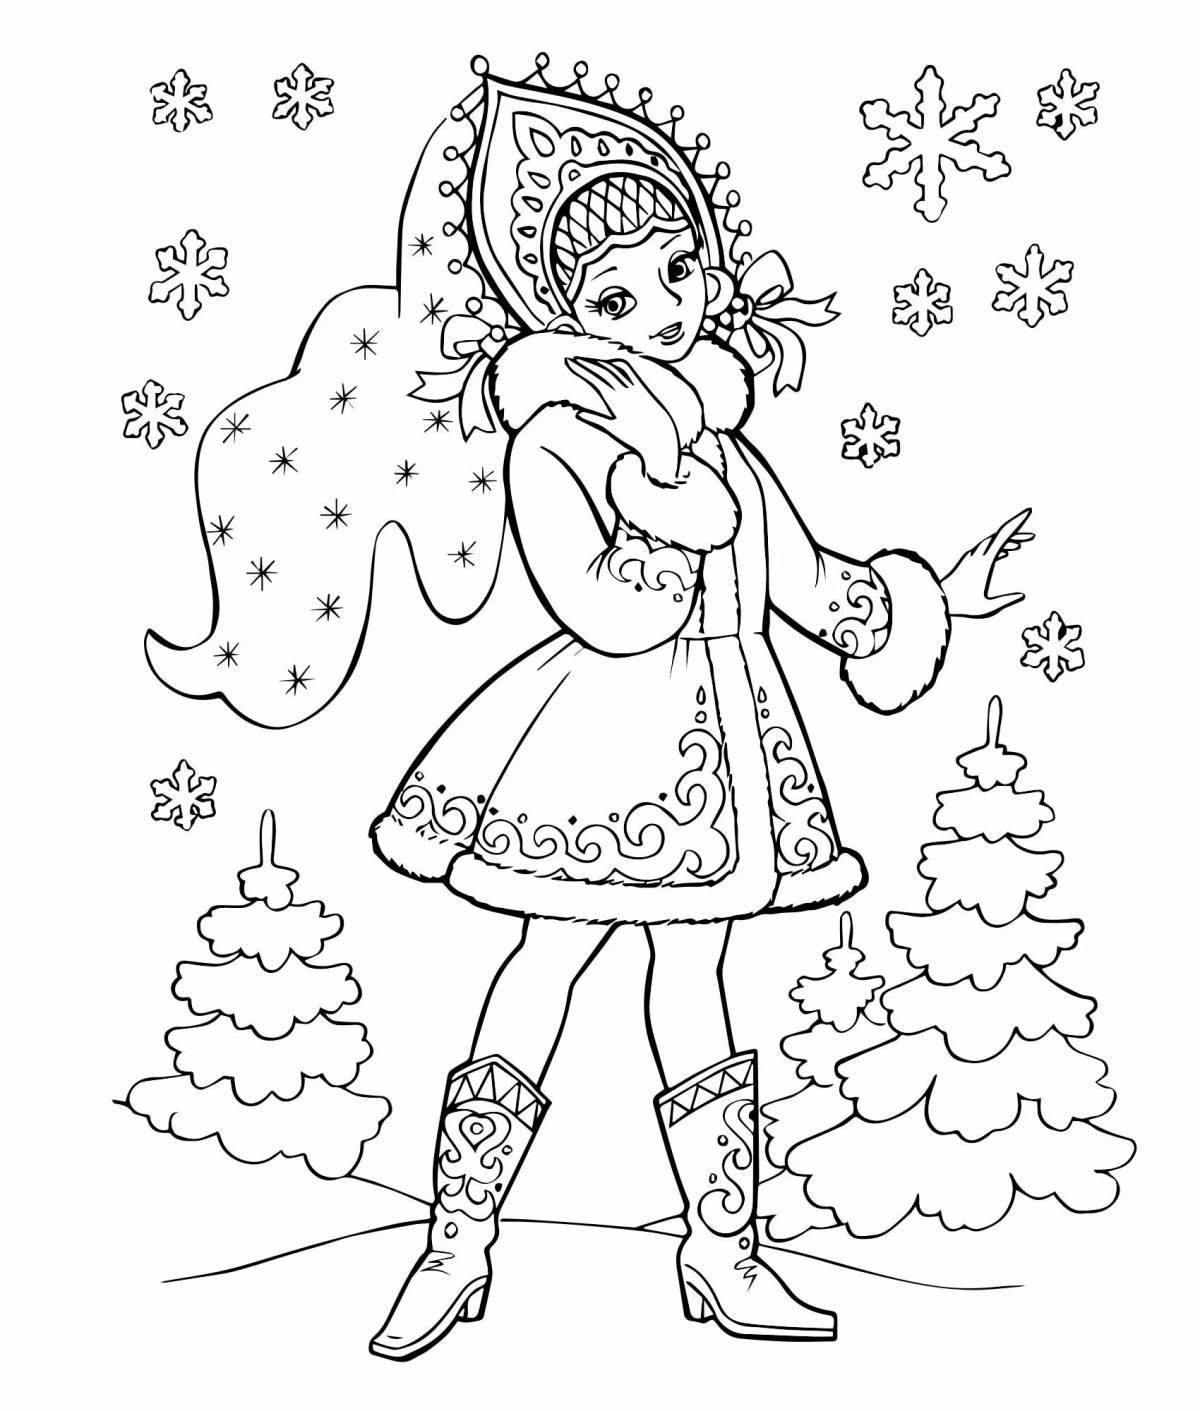 Fancy Christmas Snow Maiden coloring book